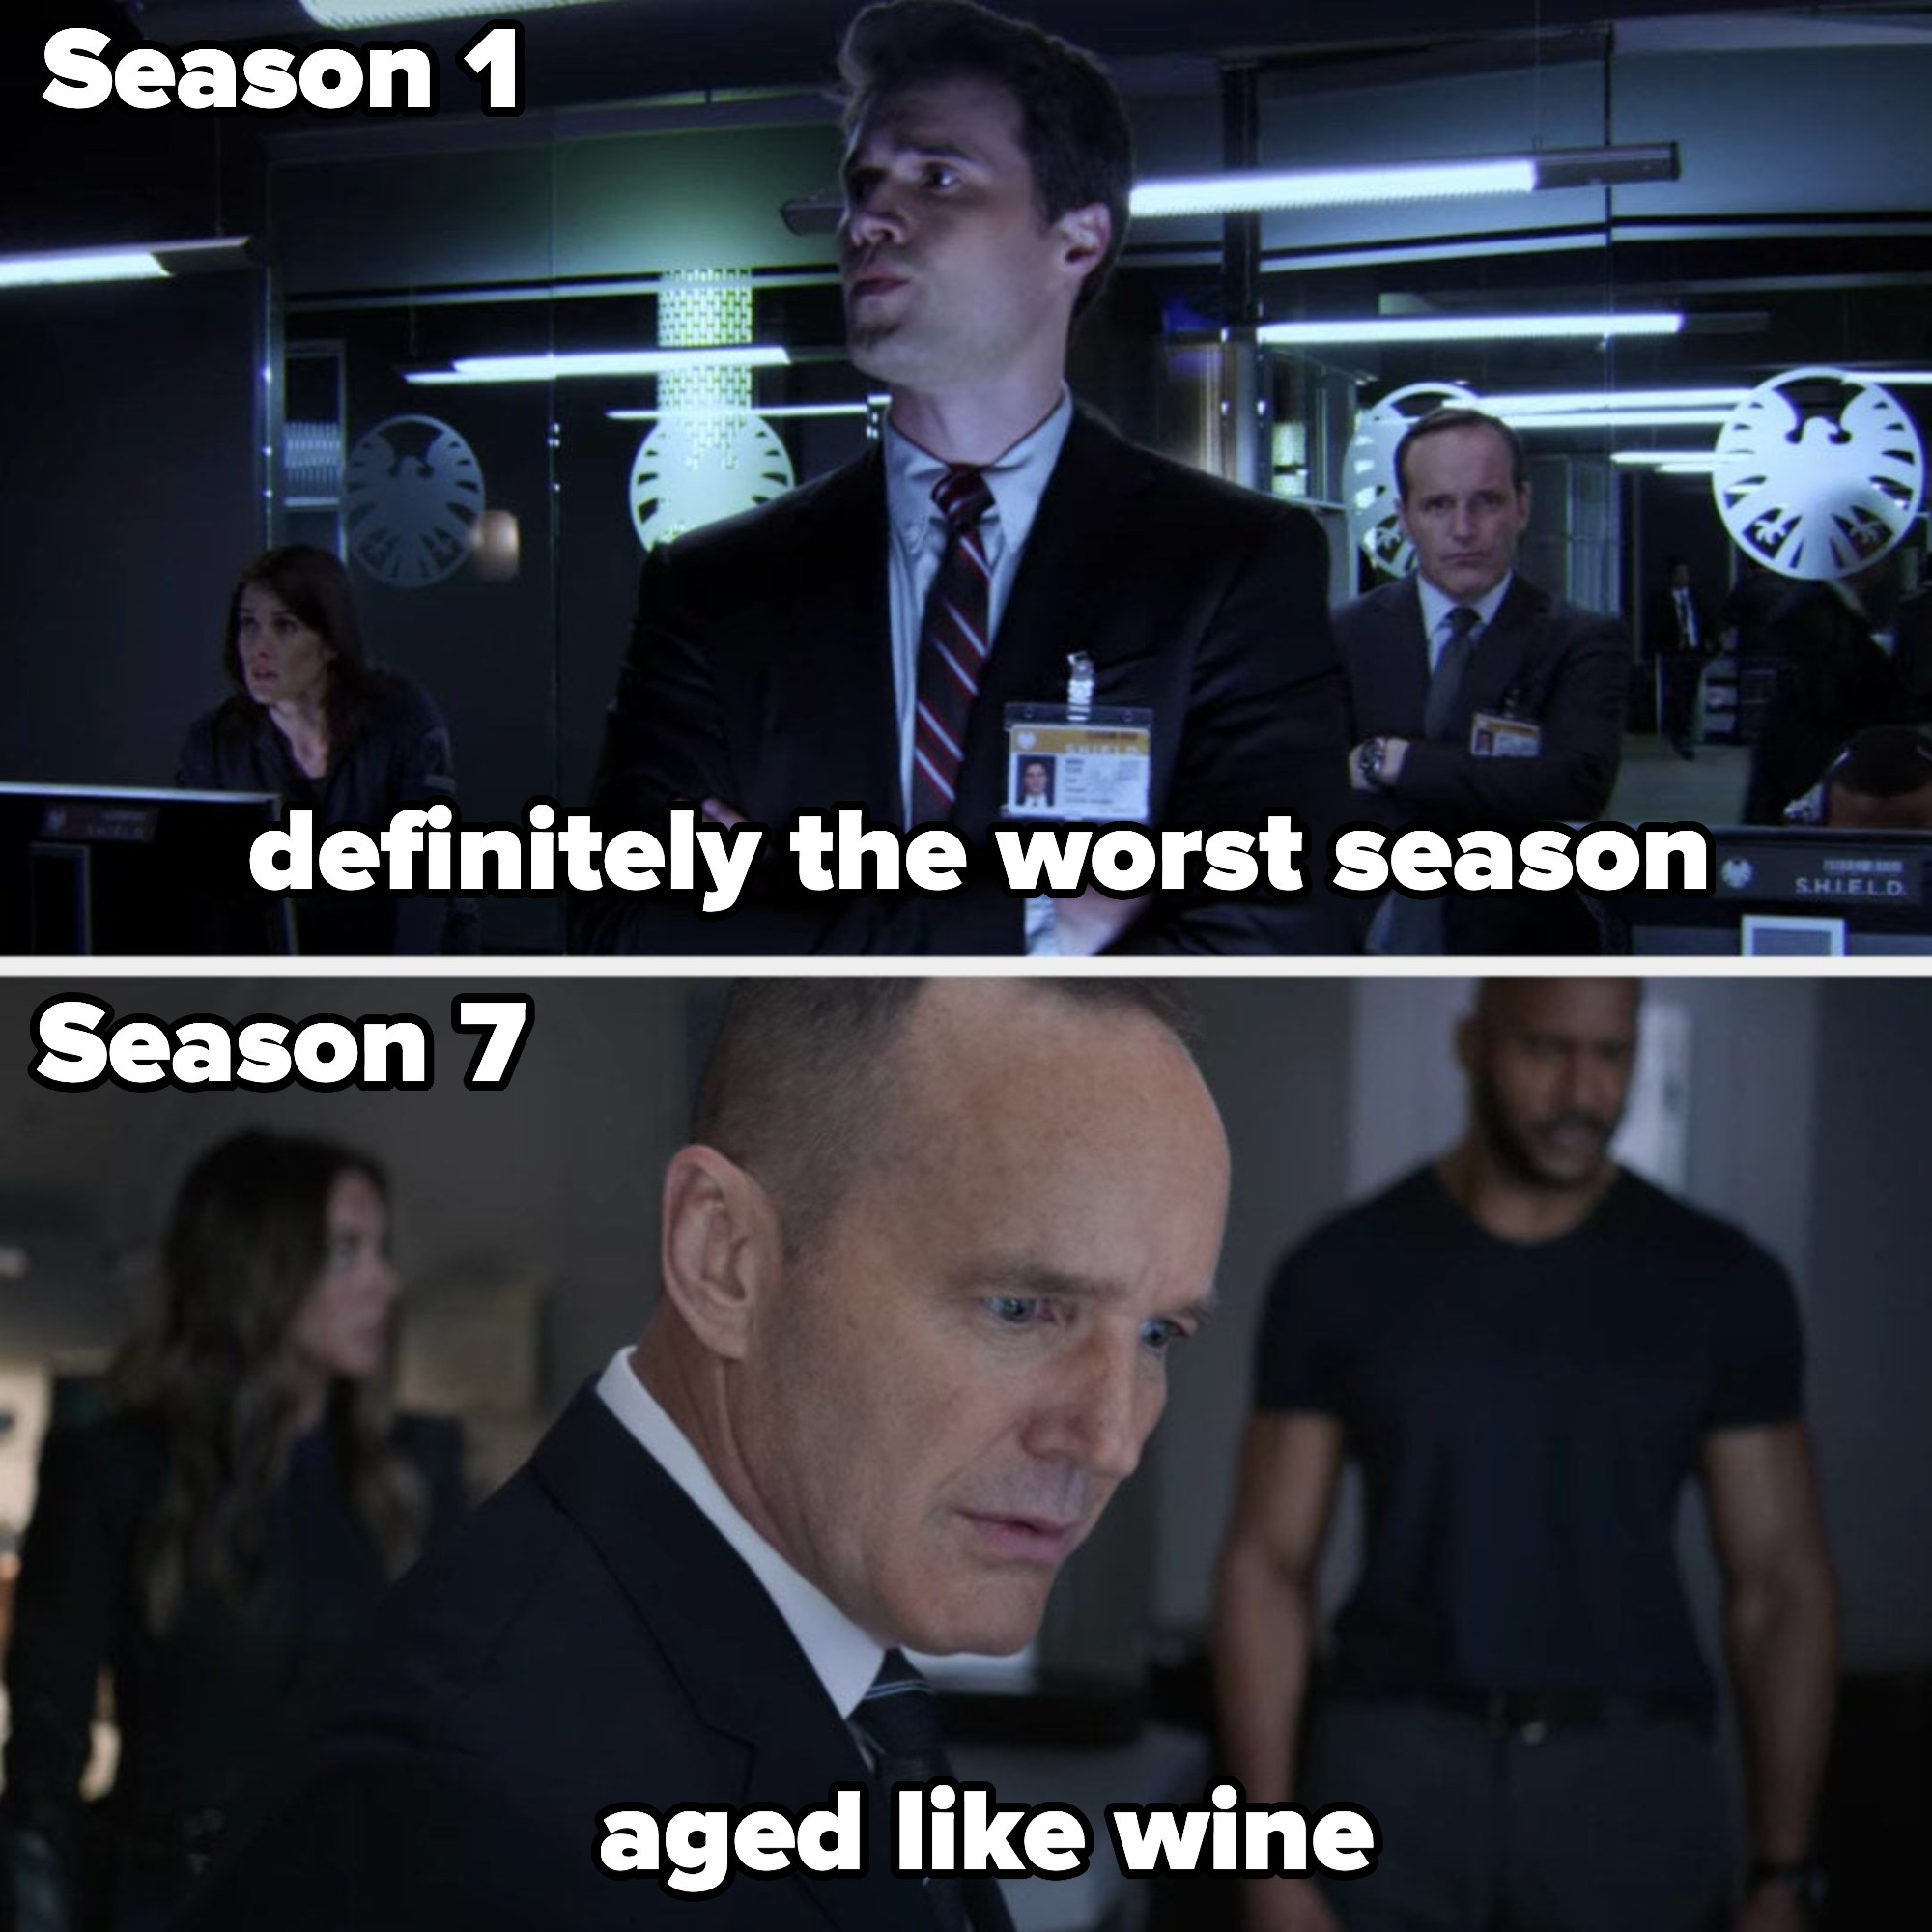 season 1 labeled &quot;definitely the worst season&quot; and 7 labeled &quot;aged like wine&quot;